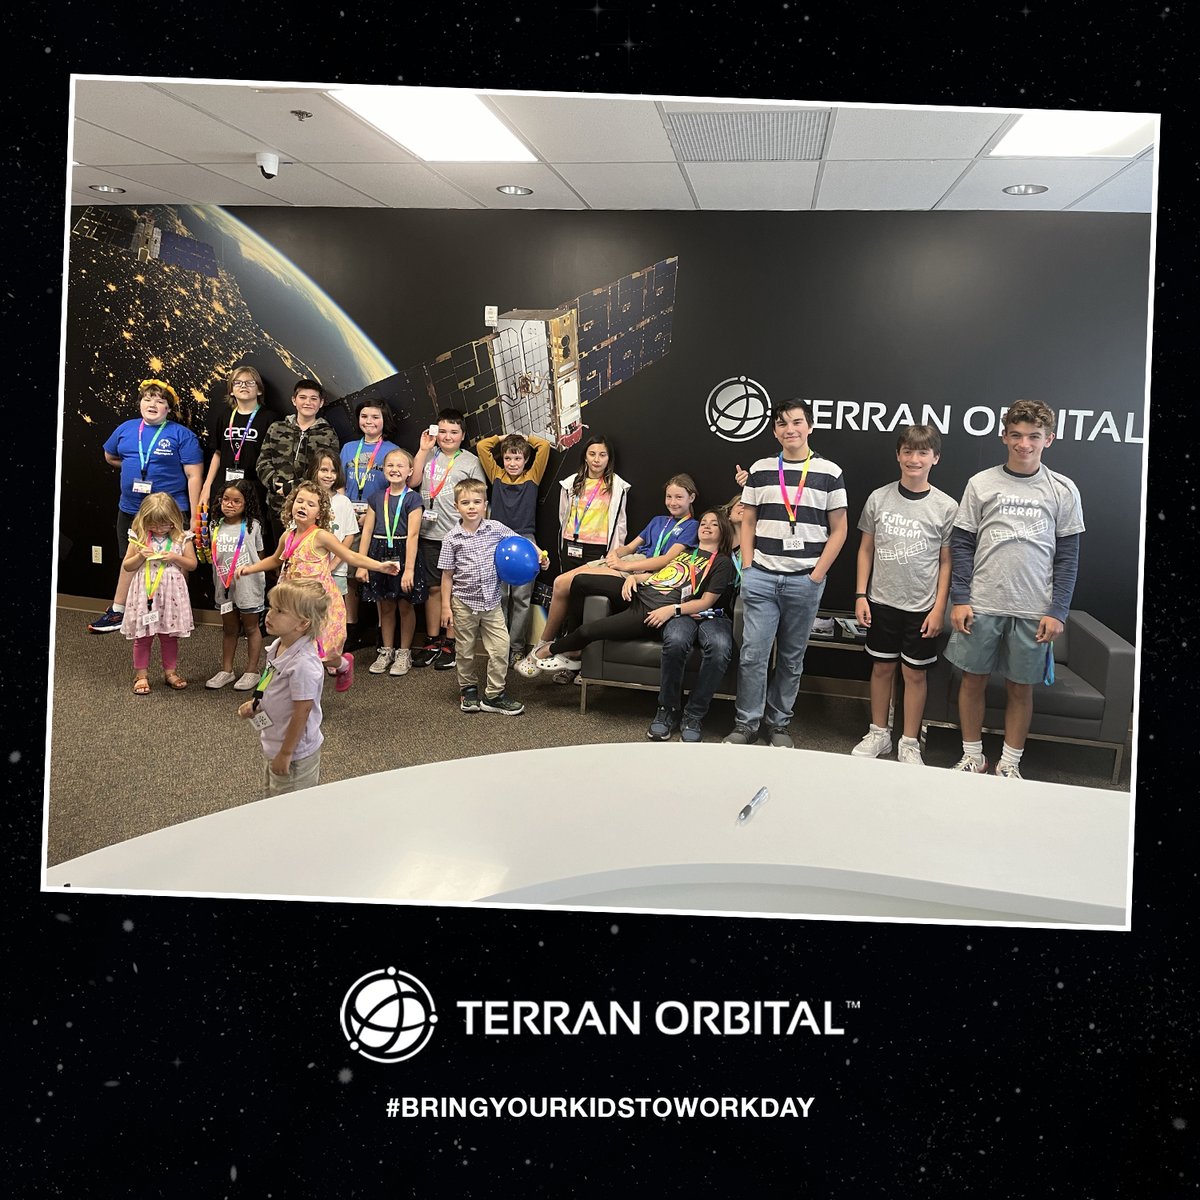 Future #Terrans in training! Terran Orbital welcomed the next generation for “Bring Your Kids to Work Day”, where young minds explored the wonders of space and had a blast with hands-on activities. #TerranOrbital #BringYourKidsToWorkDay #Kids #Future #Engineers #Space